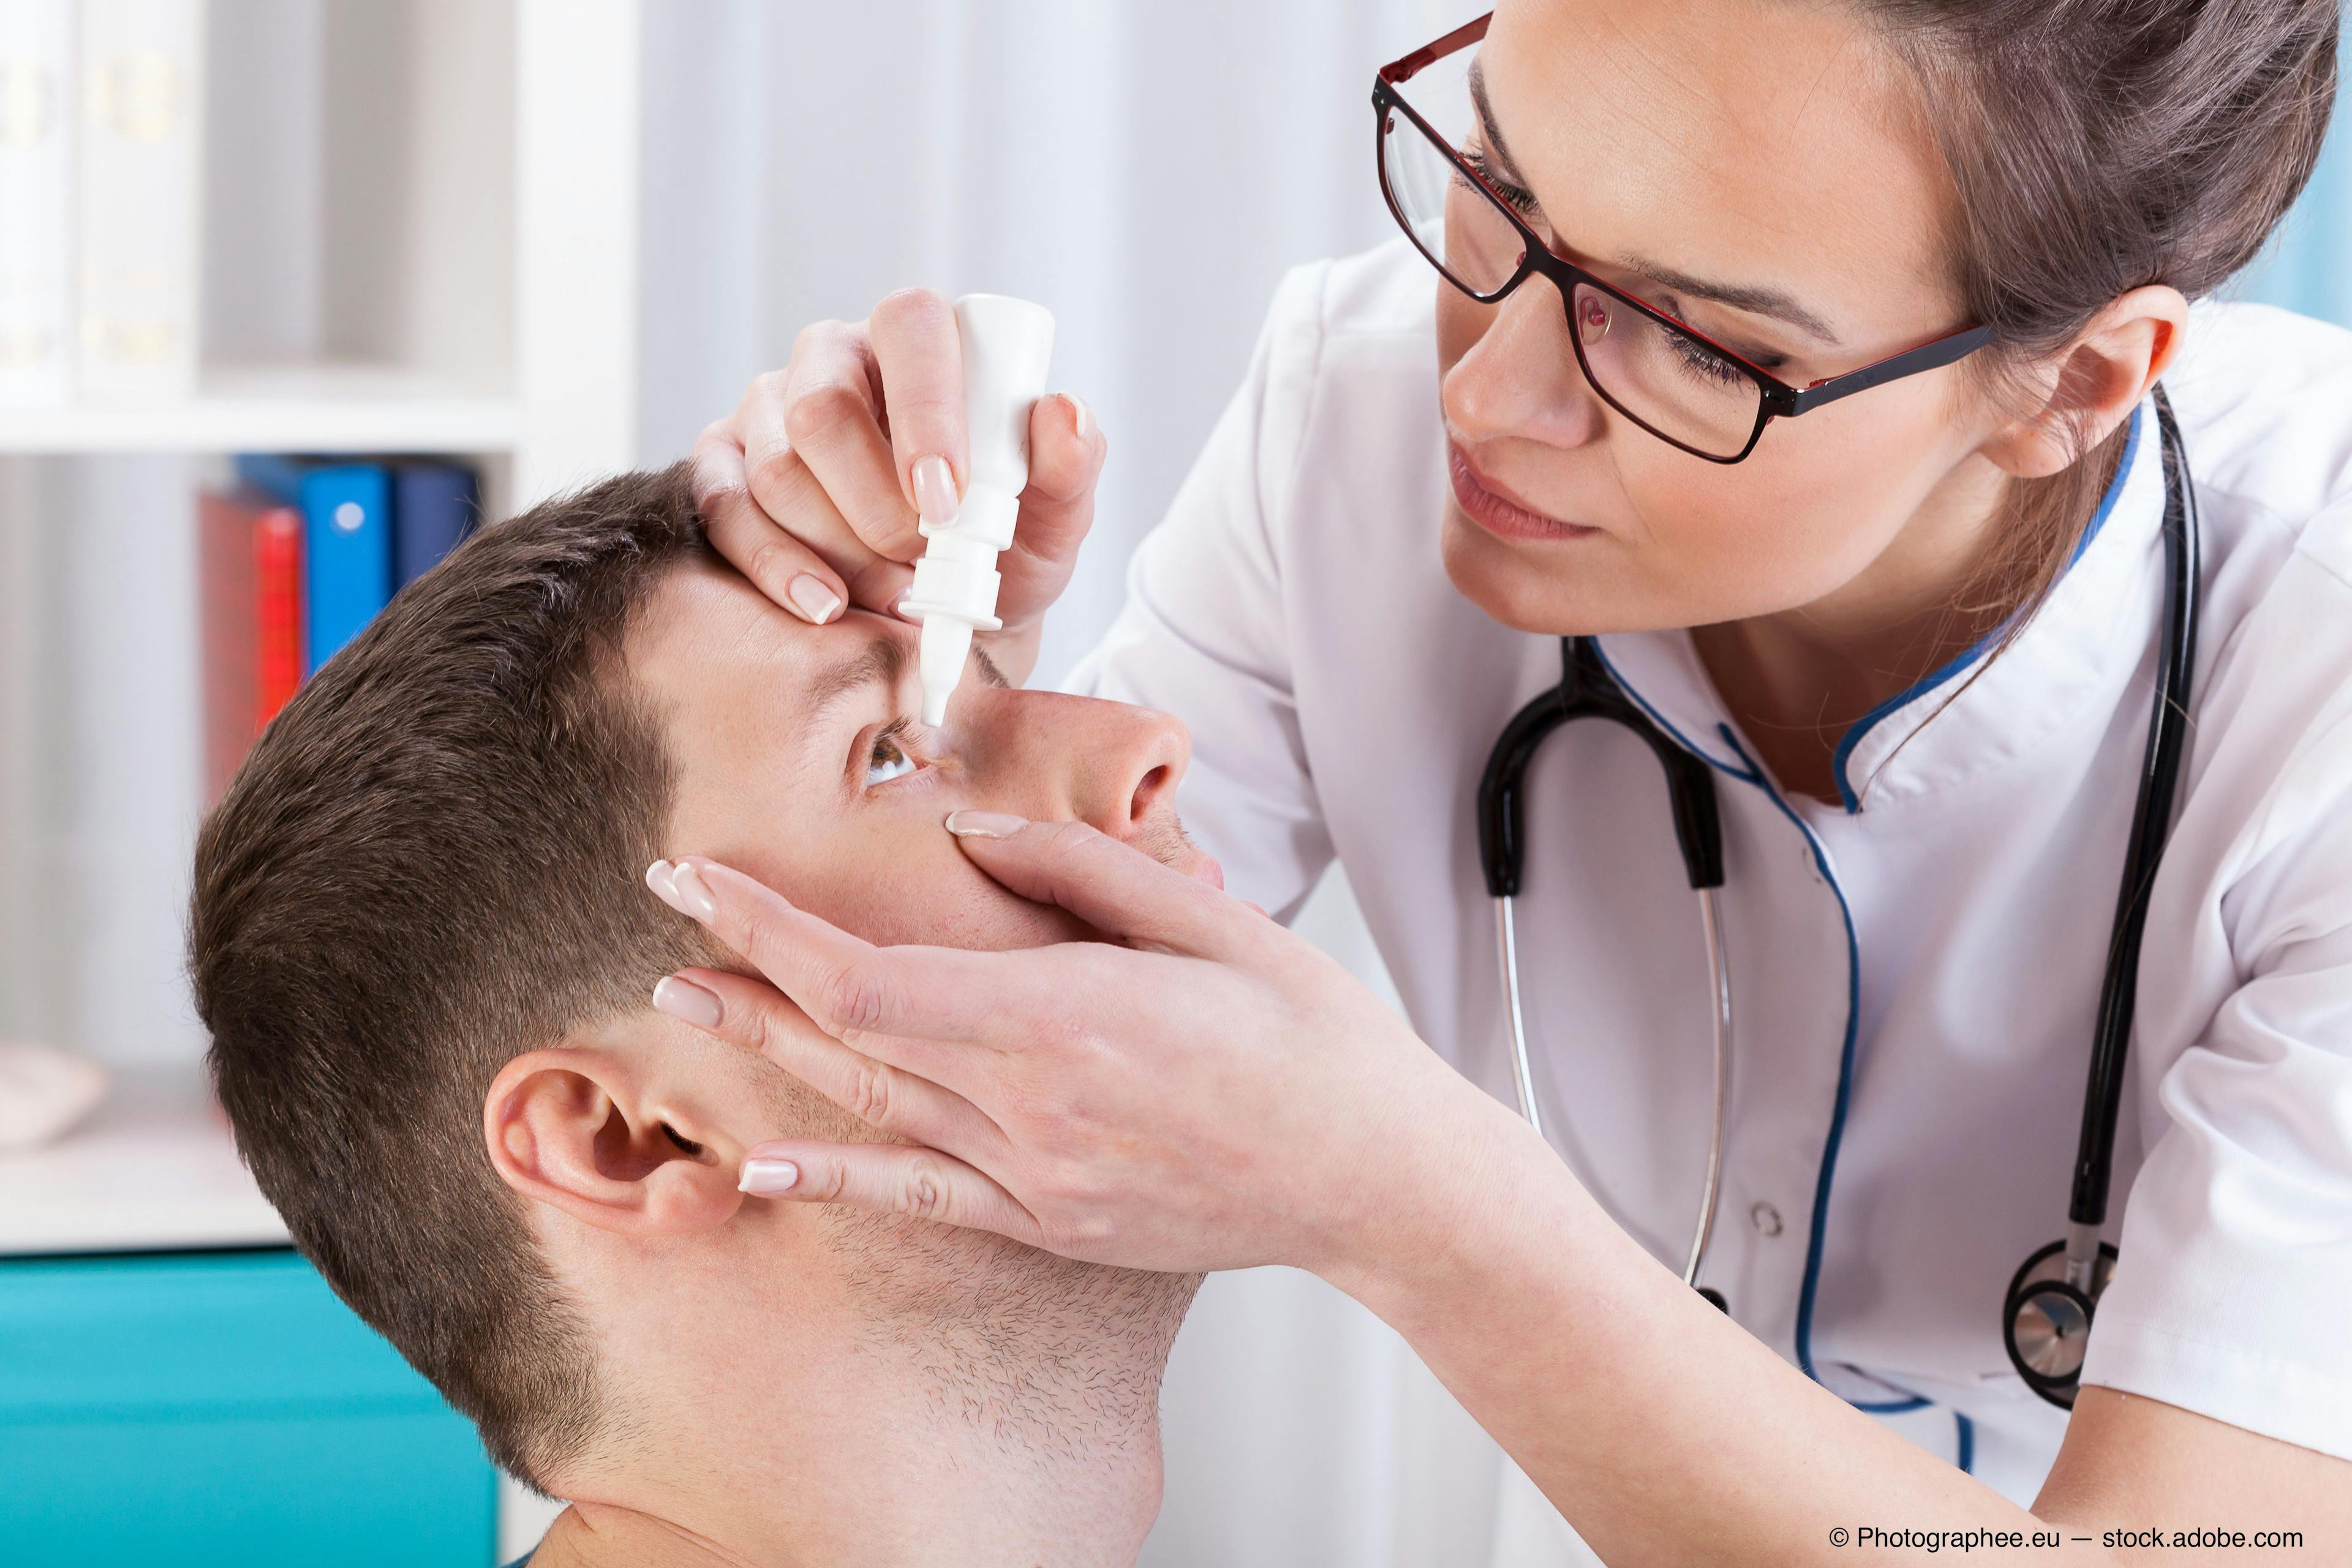 A female doctor putting eye drops into a male patient's eye